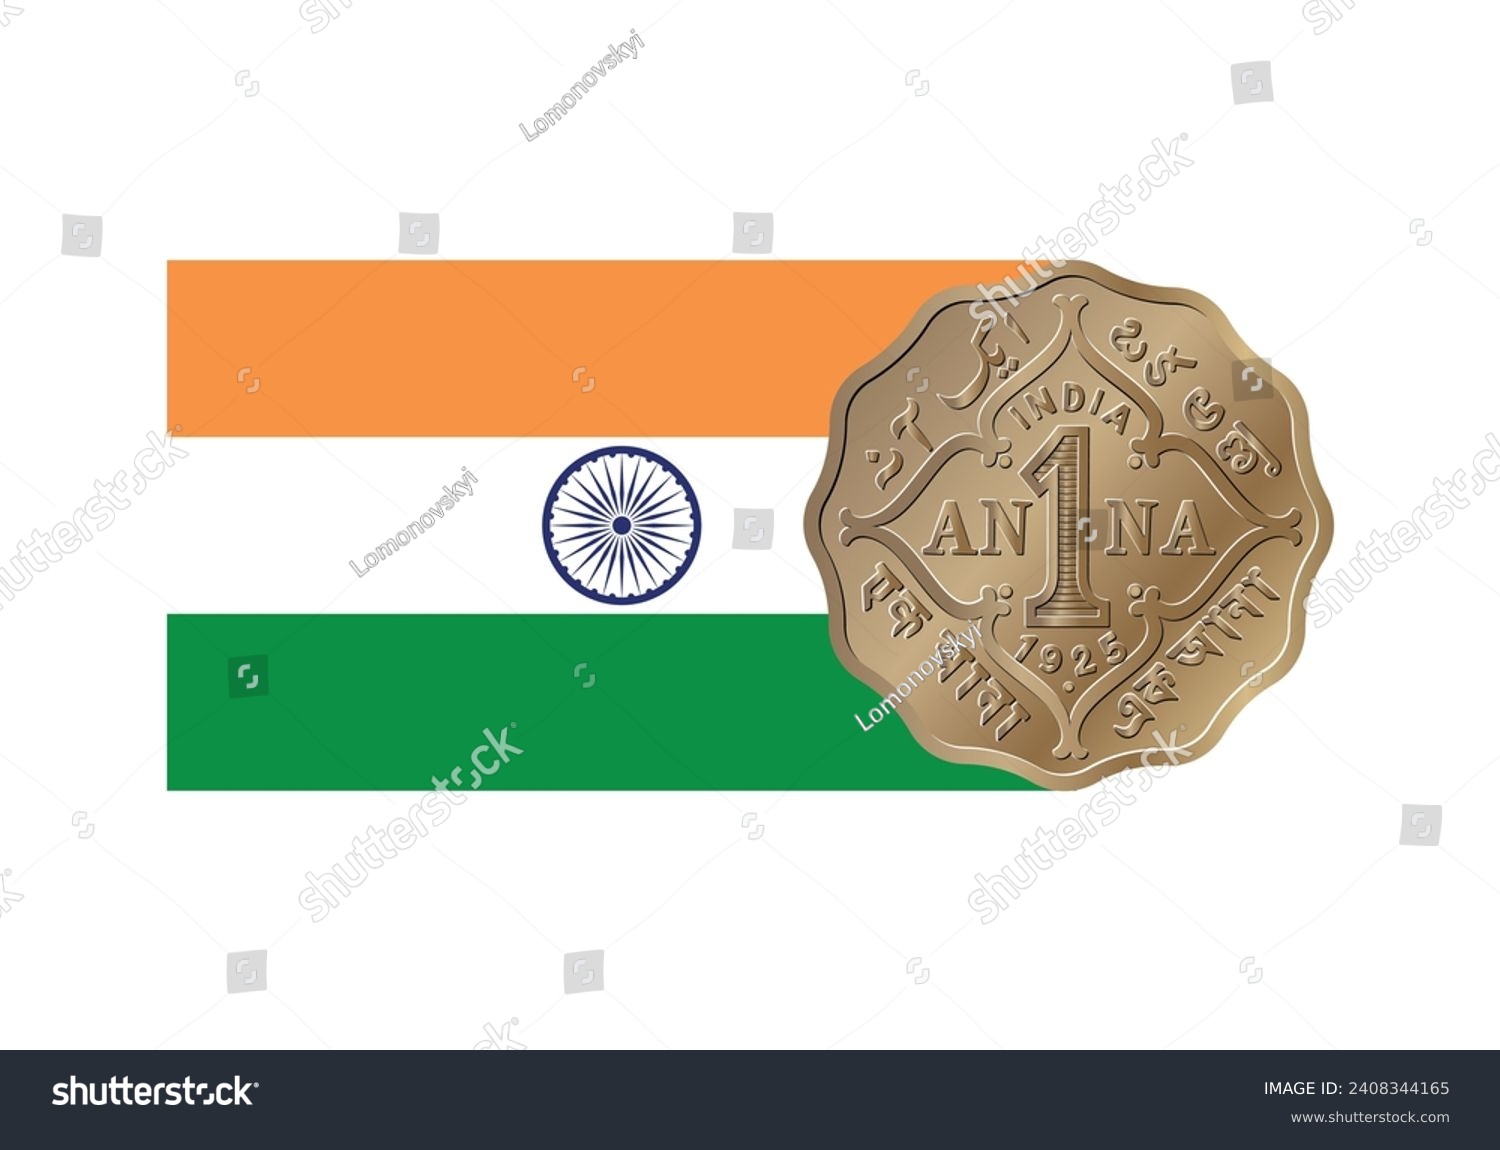 SVG of 1 Rupee coin of India. Coin side isolated on white background. Flag of India. Vector. svg